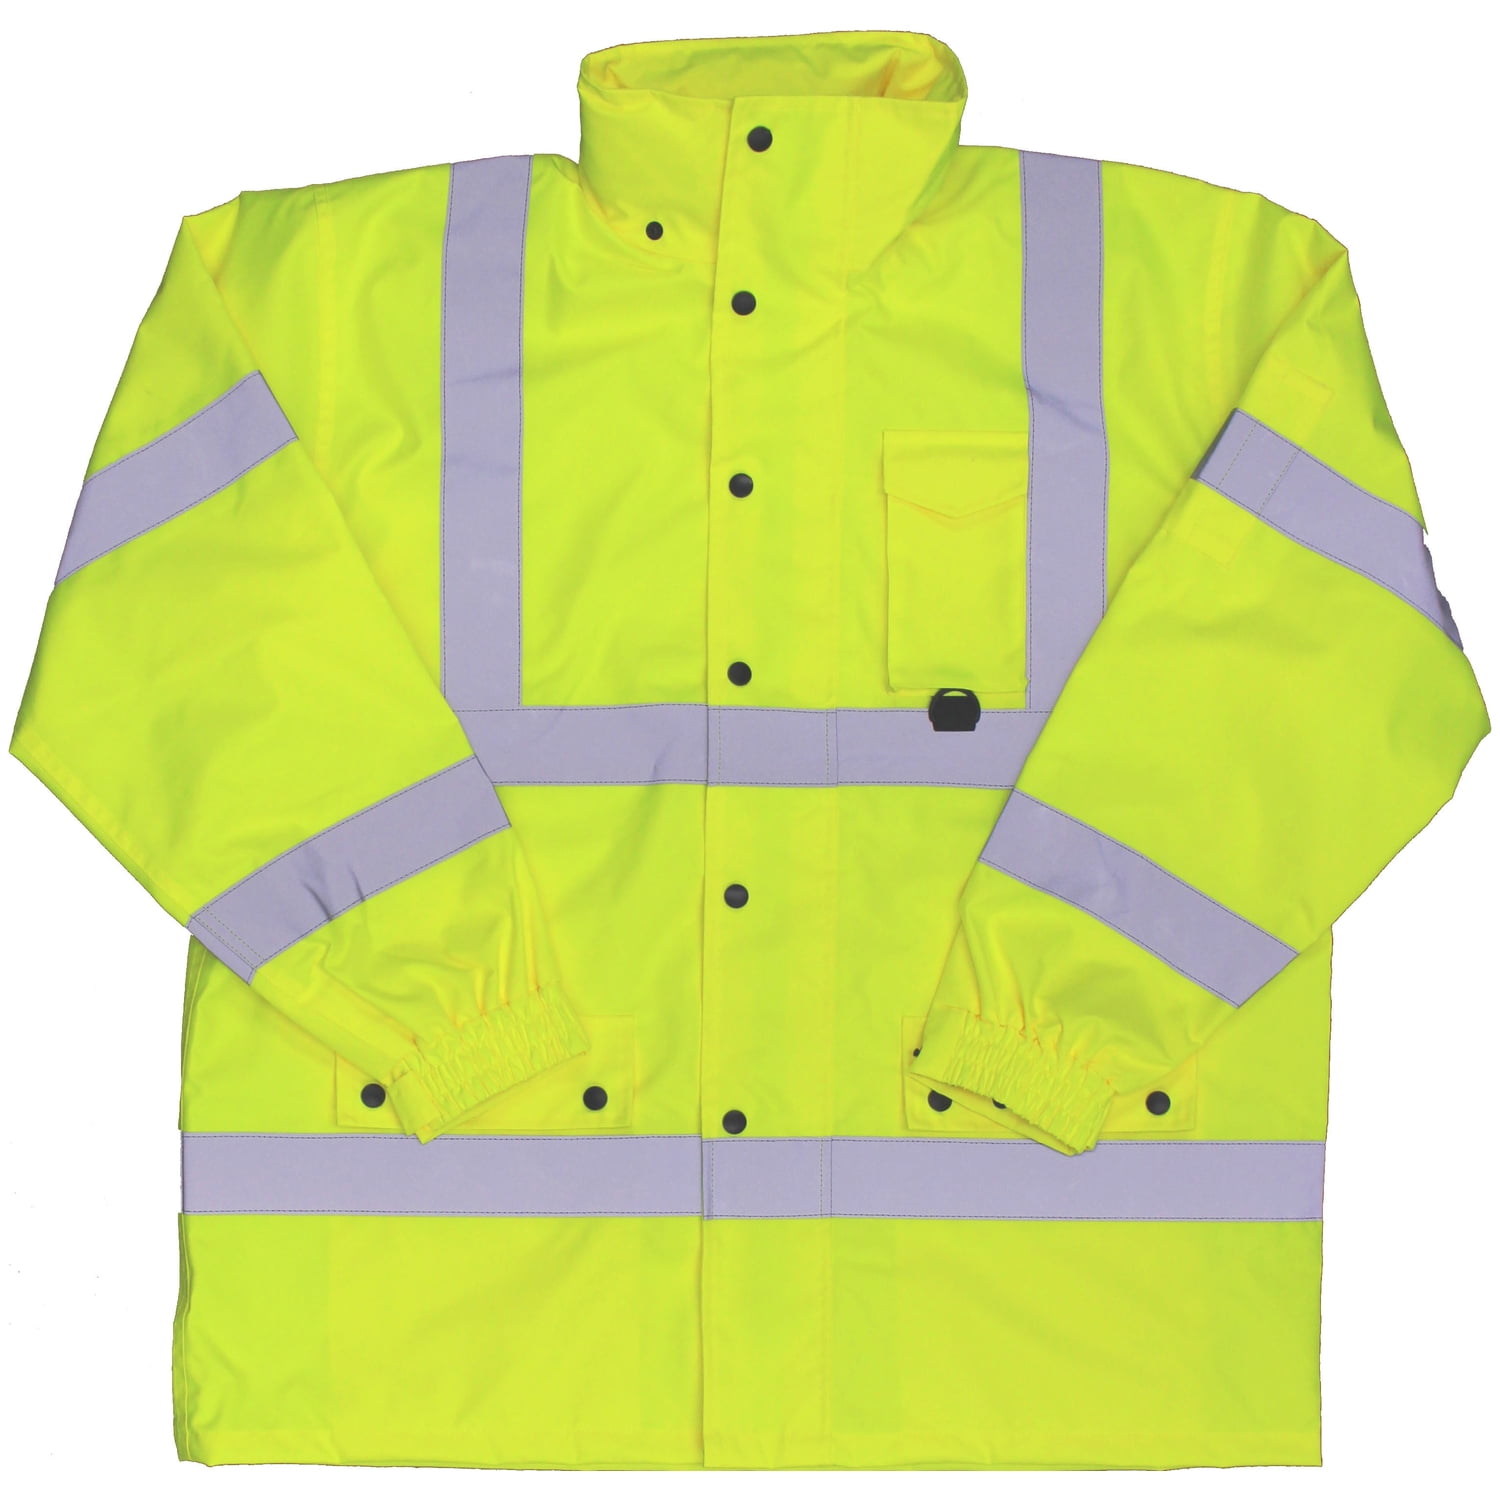 Picture of Boss 8008696 Hi-Vis Yellow Polyester Unisex Rain Jacket, Extra Large